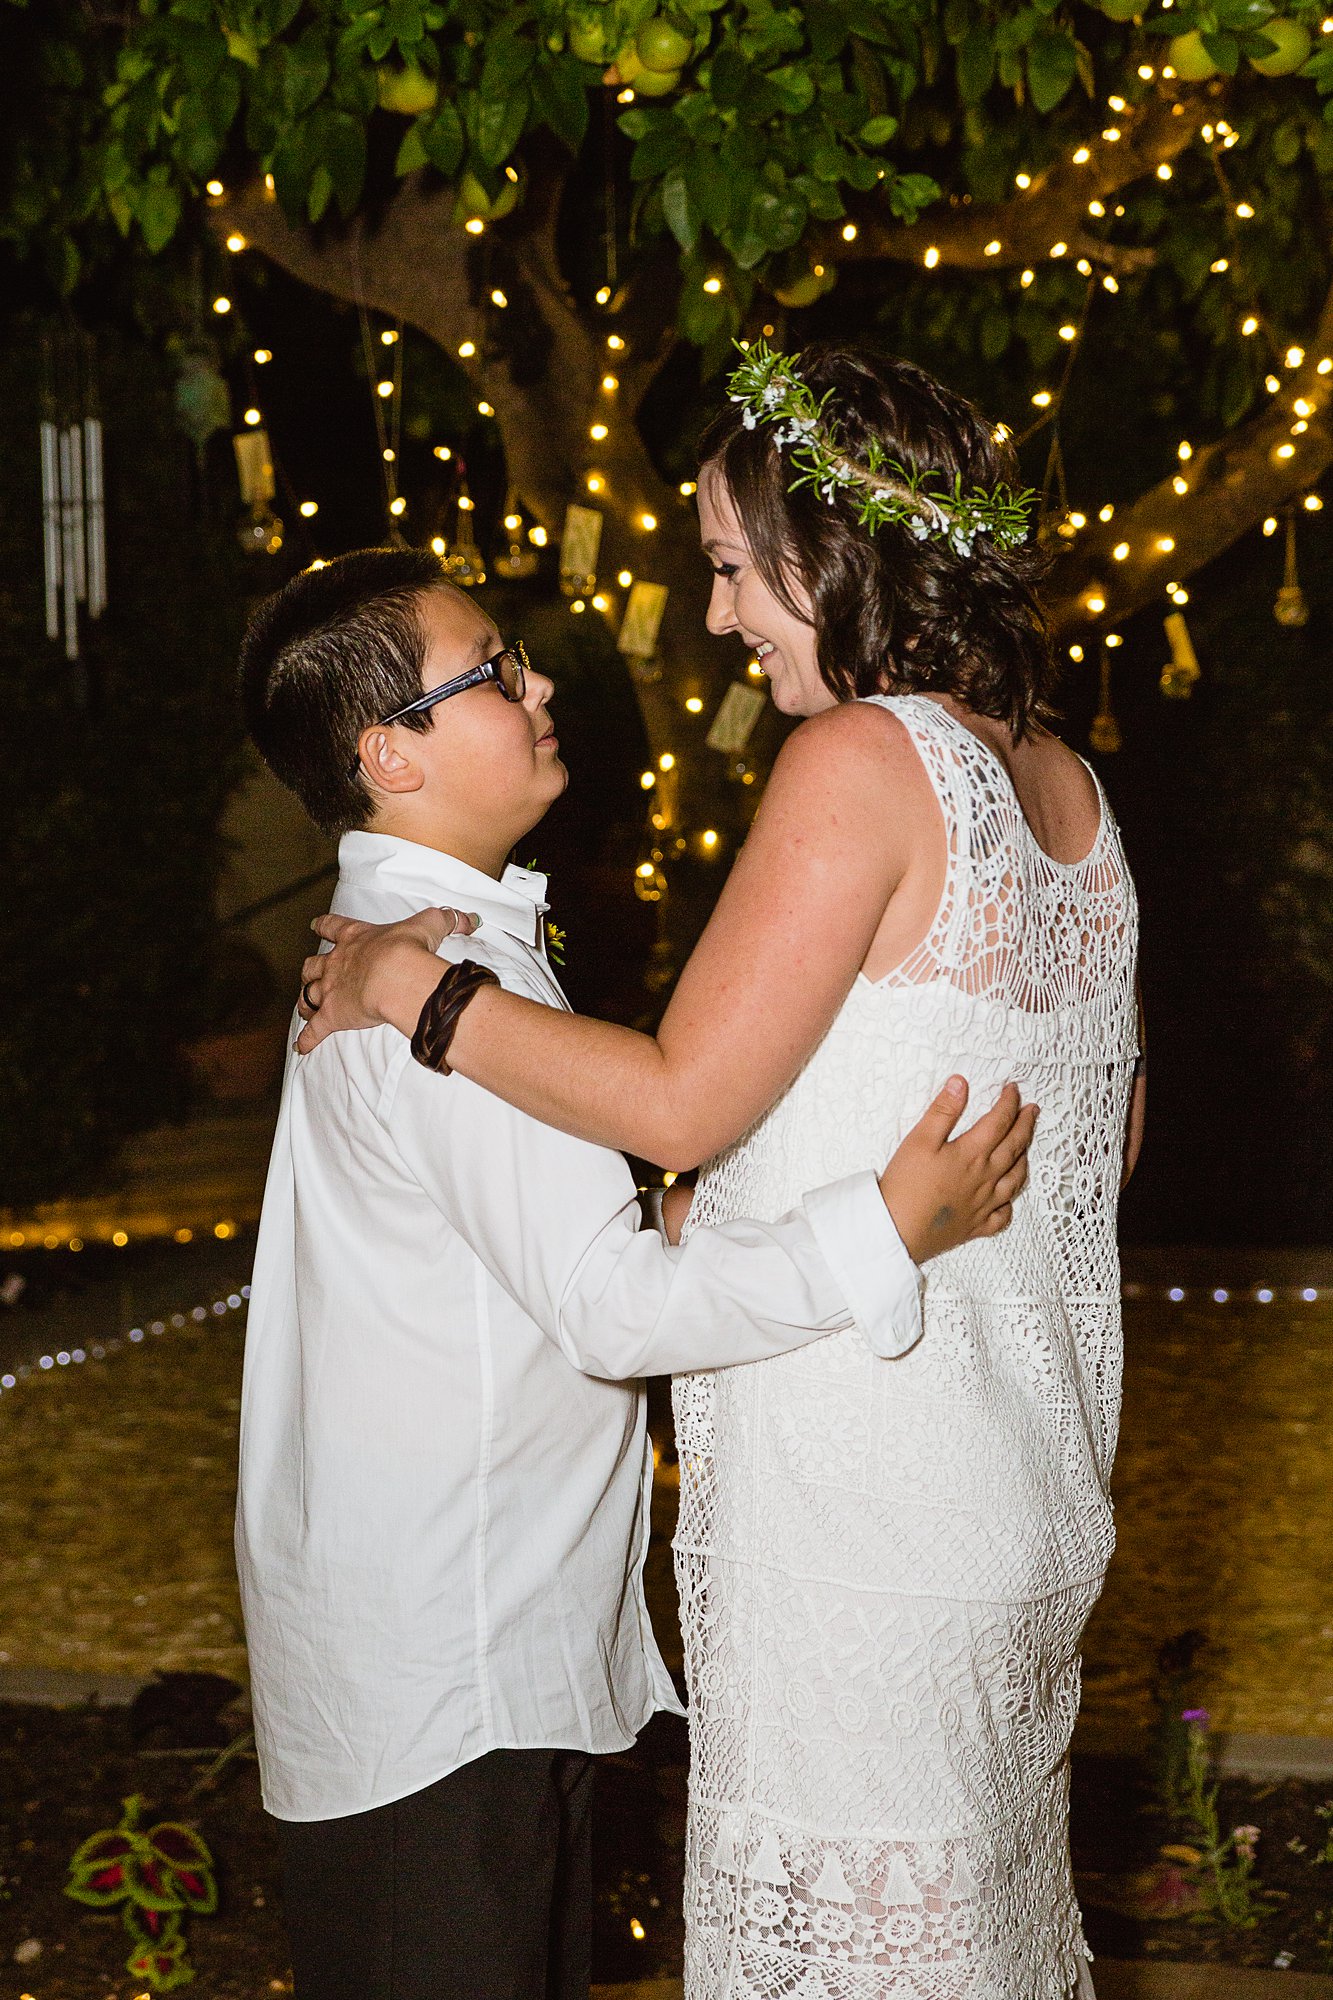 Bride and her son sharing the mother son dance at their wedding by Phoenix wedding photographer PMA Photography.